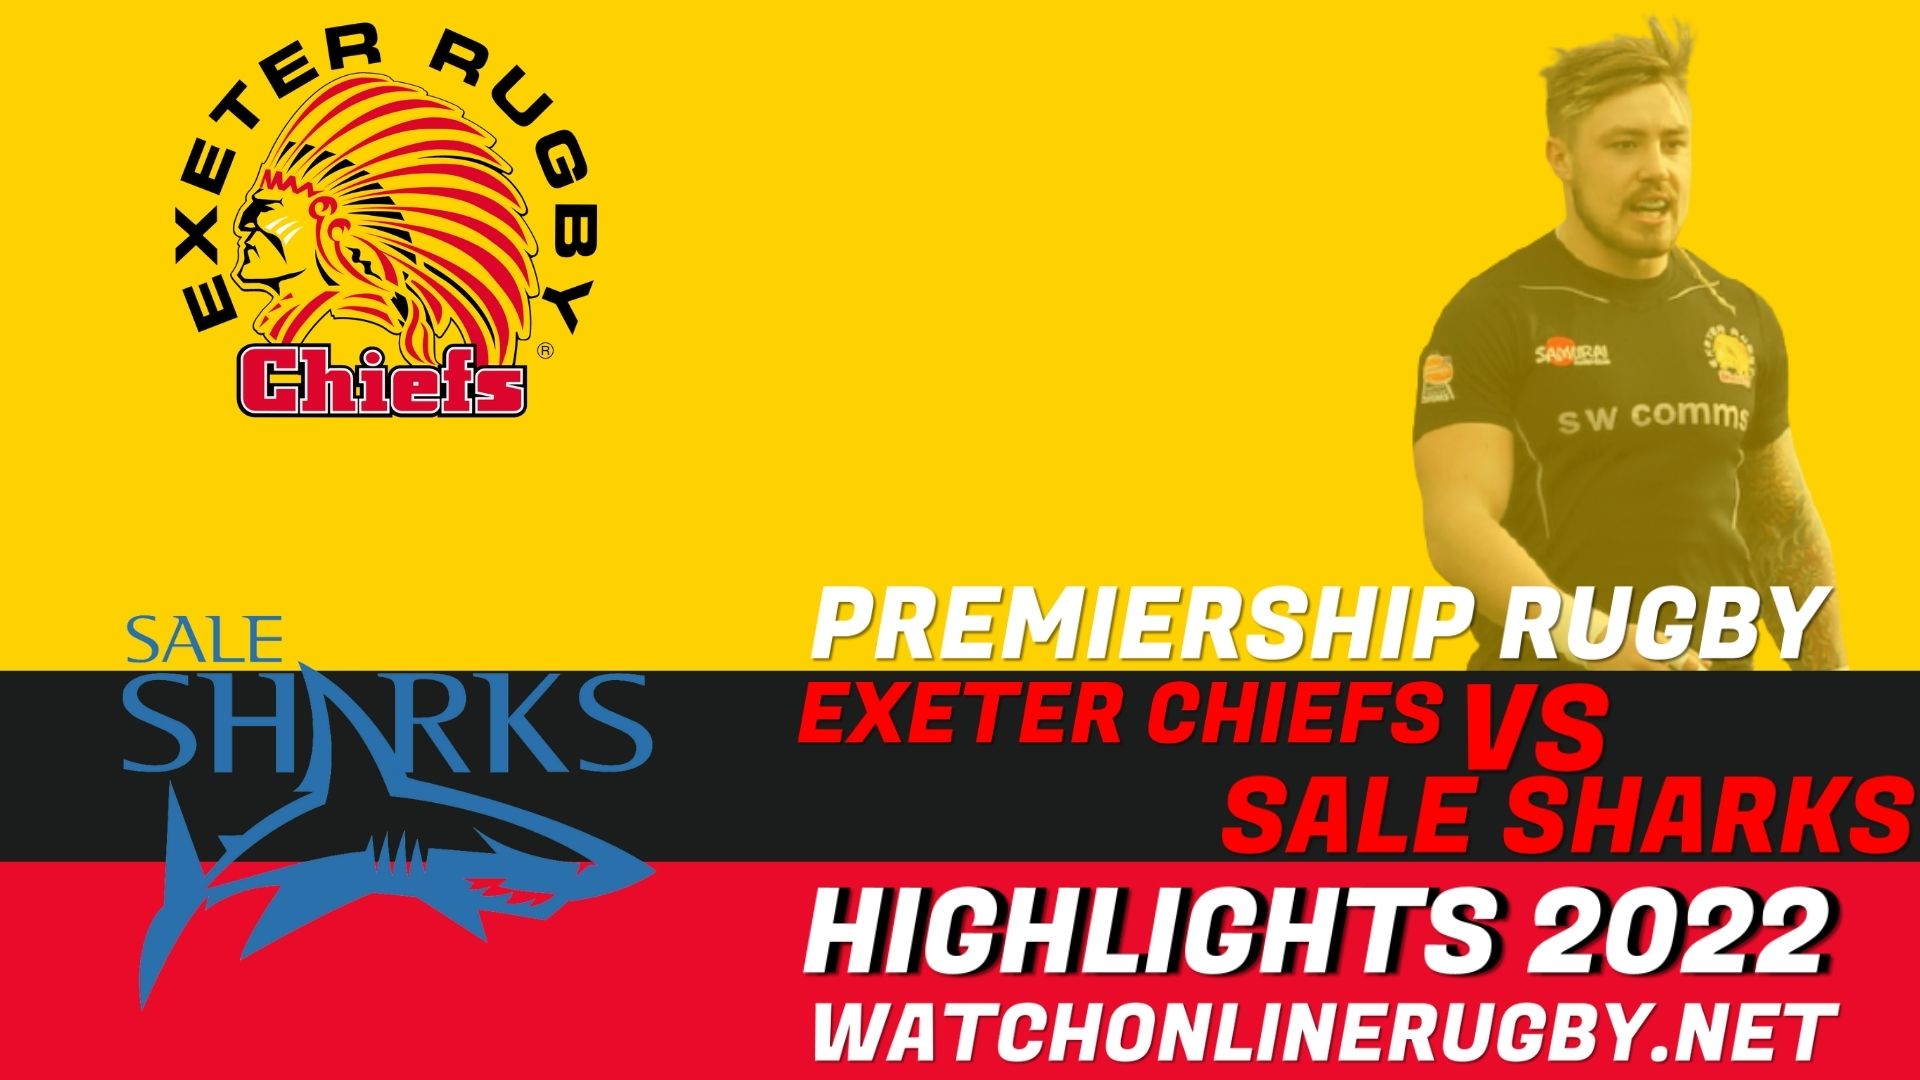 Exeter Chiefs Vs Sale Sharks Premiership Rugby 2022 RD 19